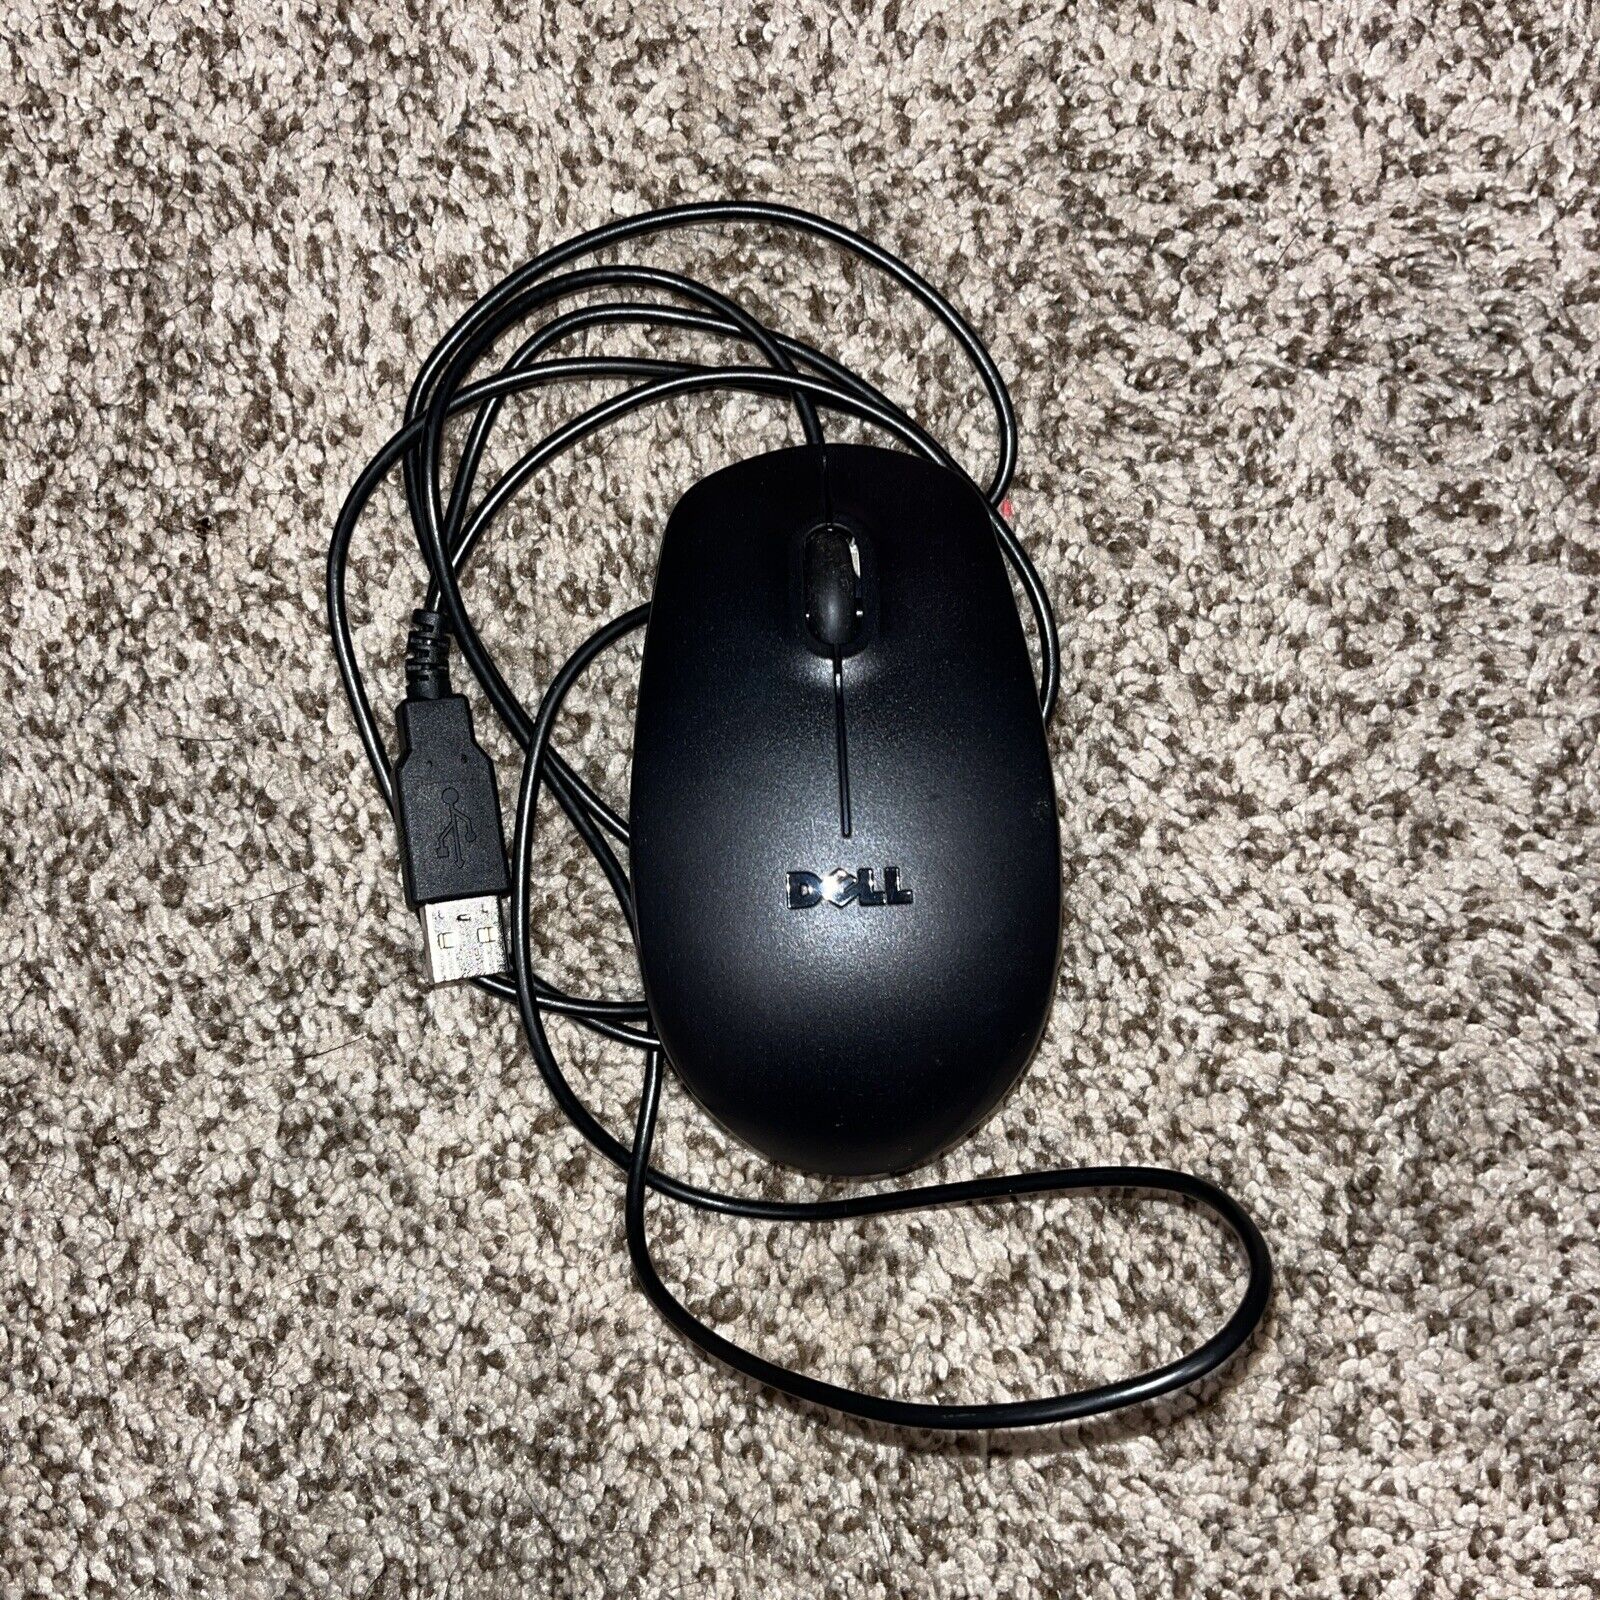 Dell MS111 Corded Mouse Color Black